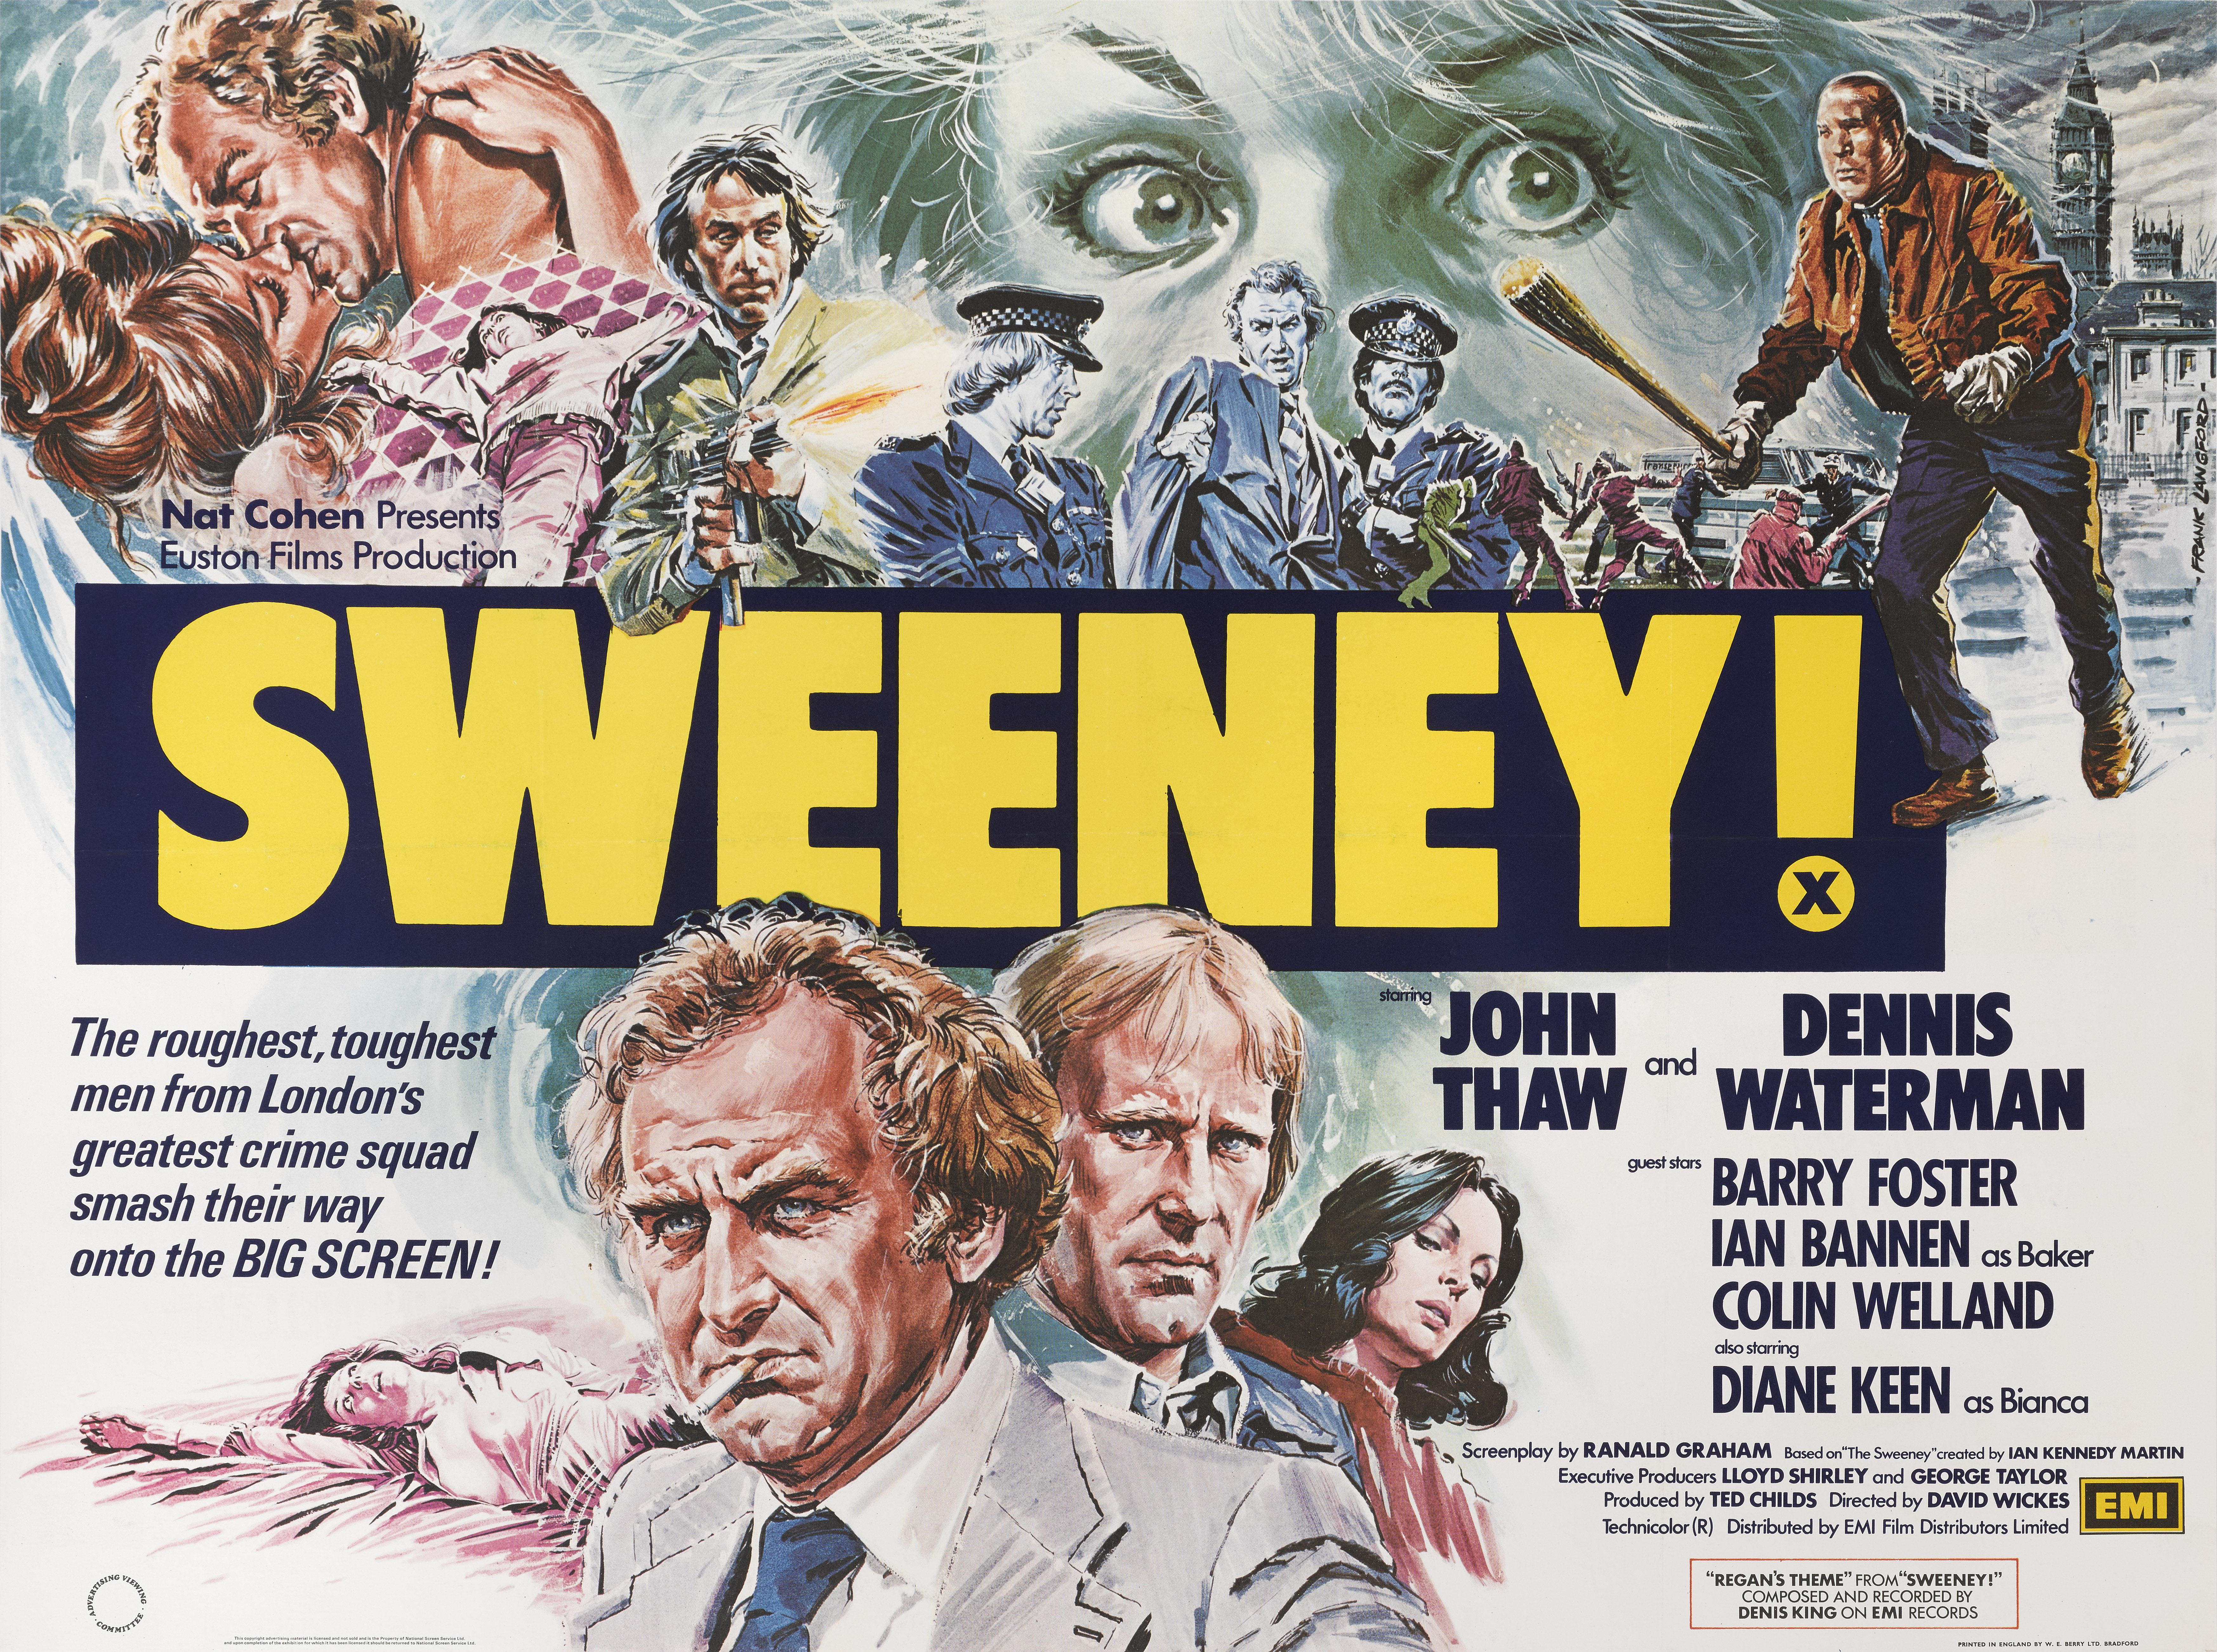 Original British film poster for the 1977 Action, crime film Sweeney! 
This film stared John Thaw and Dennis Waterman based on the TV series that ran from 1974 to 1978.
This film was directed by David Wickes John Thaw plays Detective Inspector